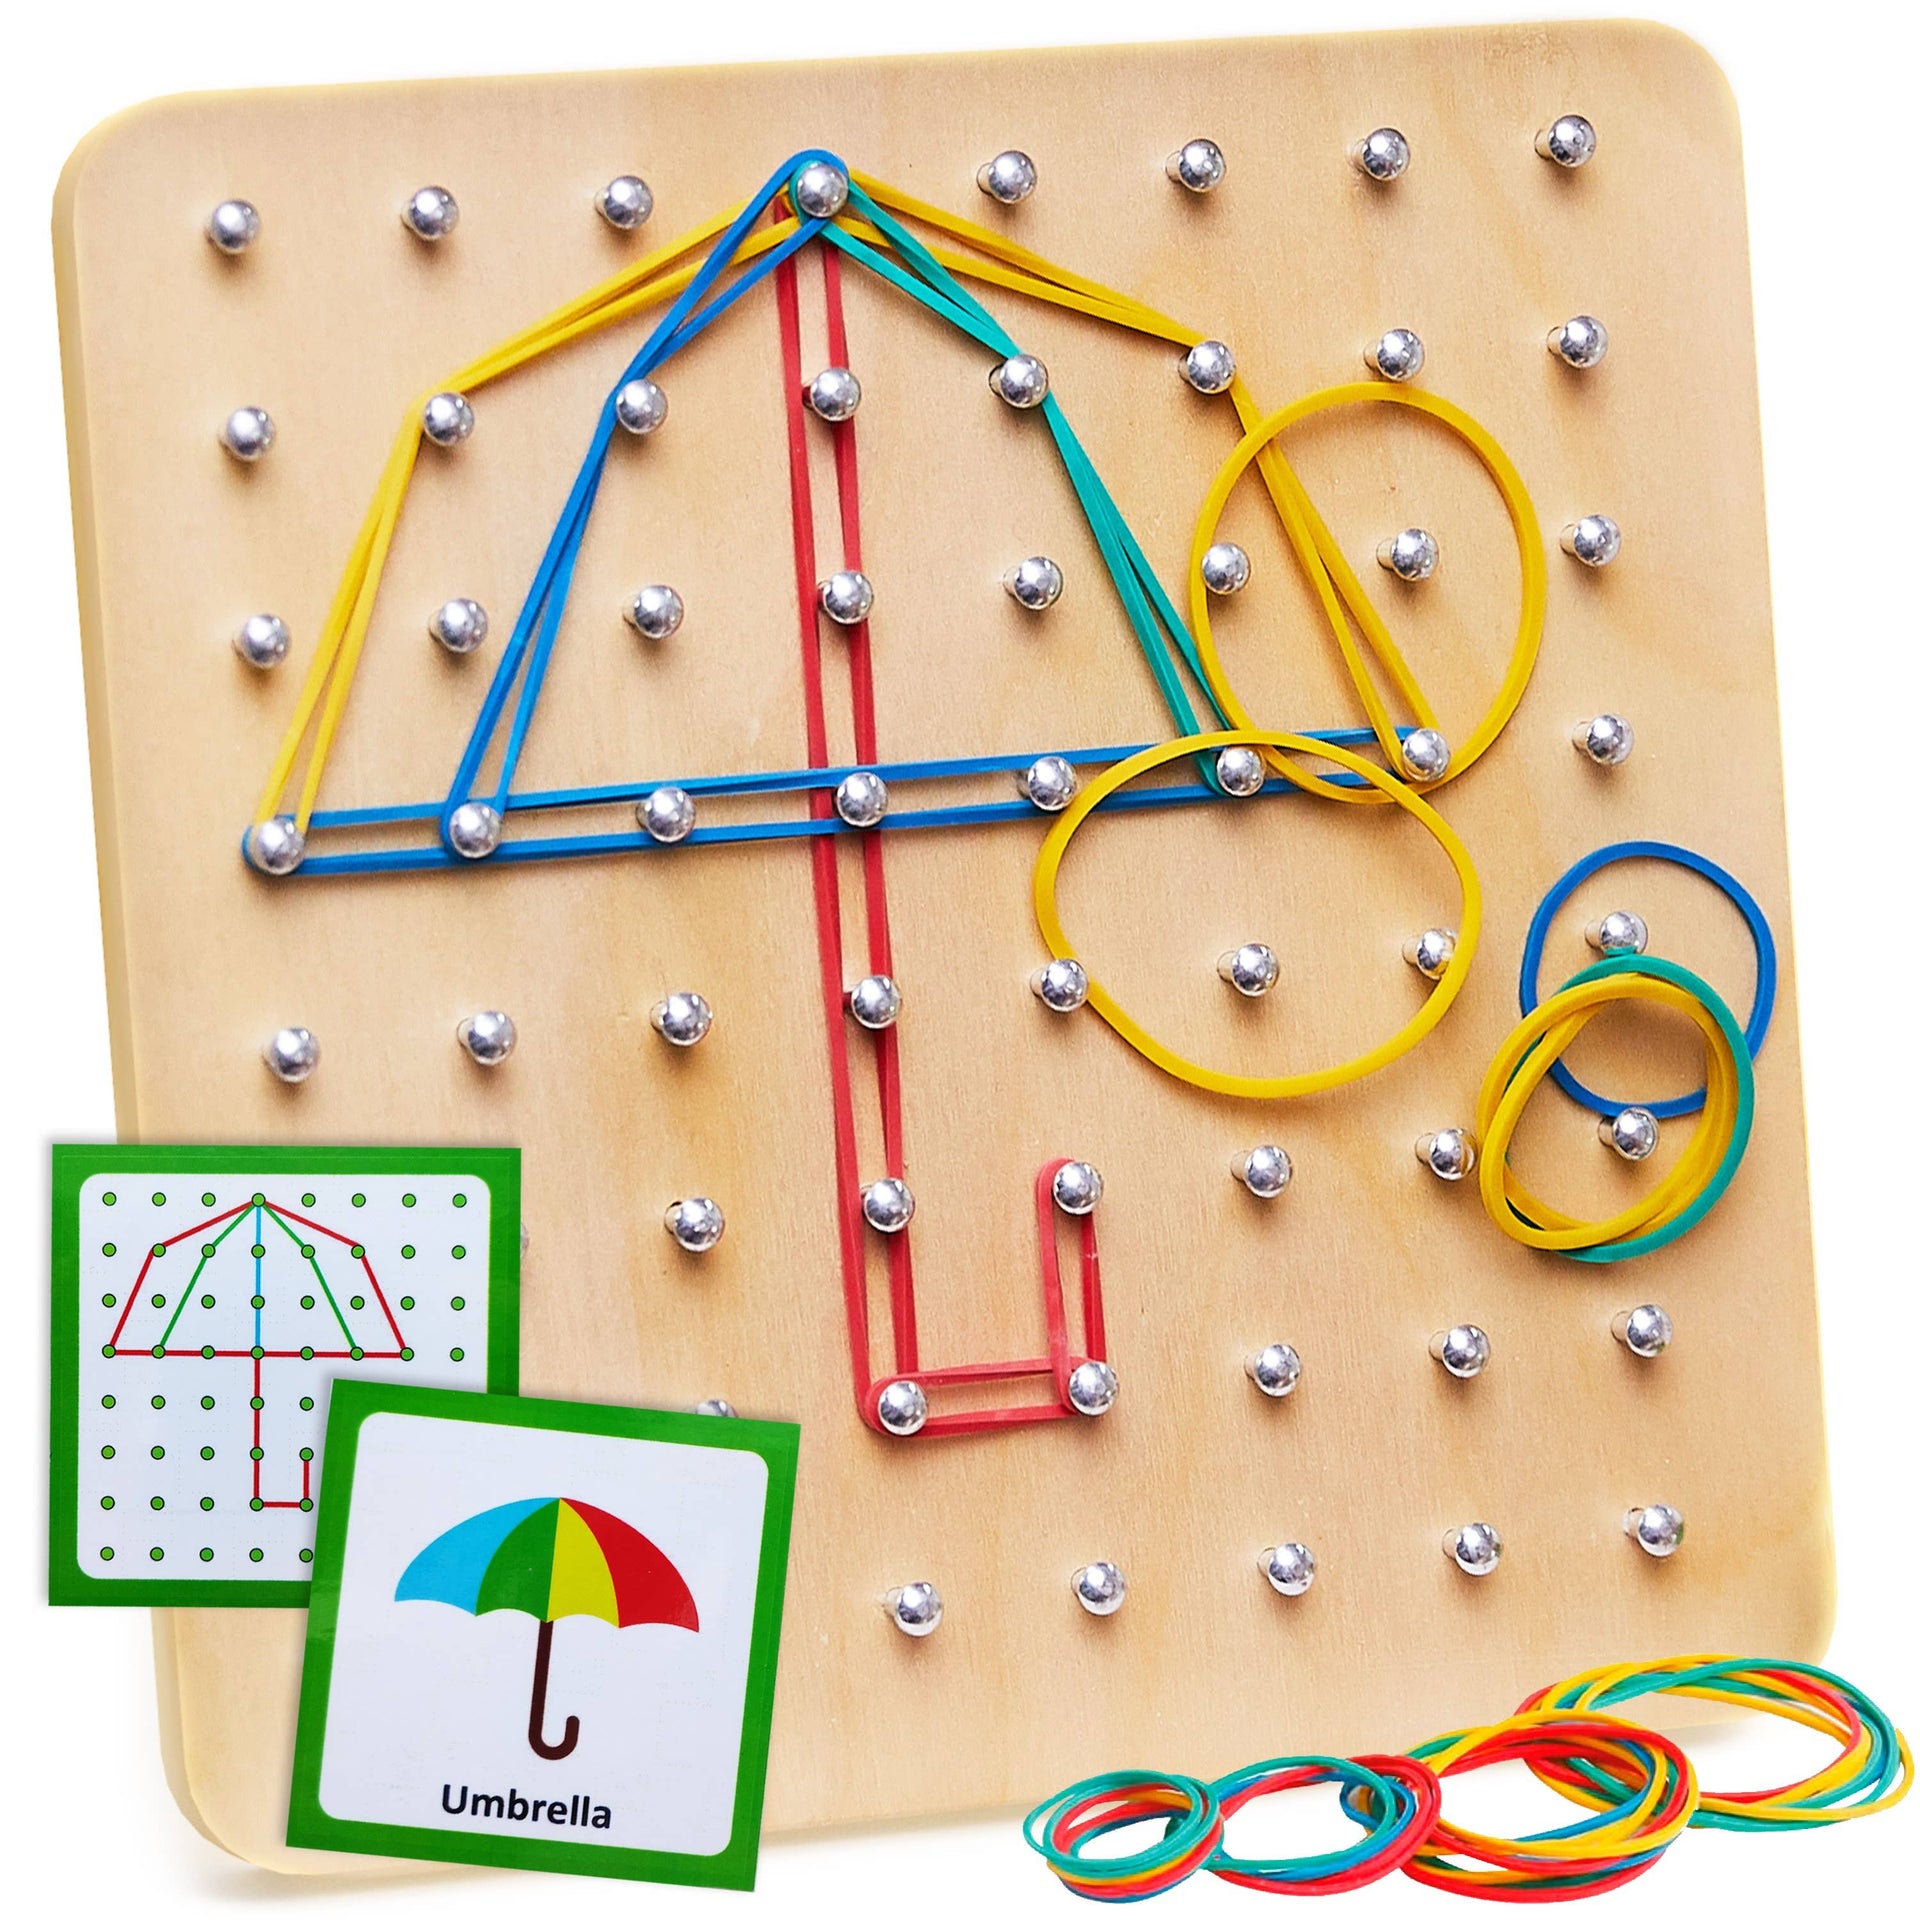 Panda Brothers - Montessori Toy for Kids - Wooden Geoboard with rubber bands I